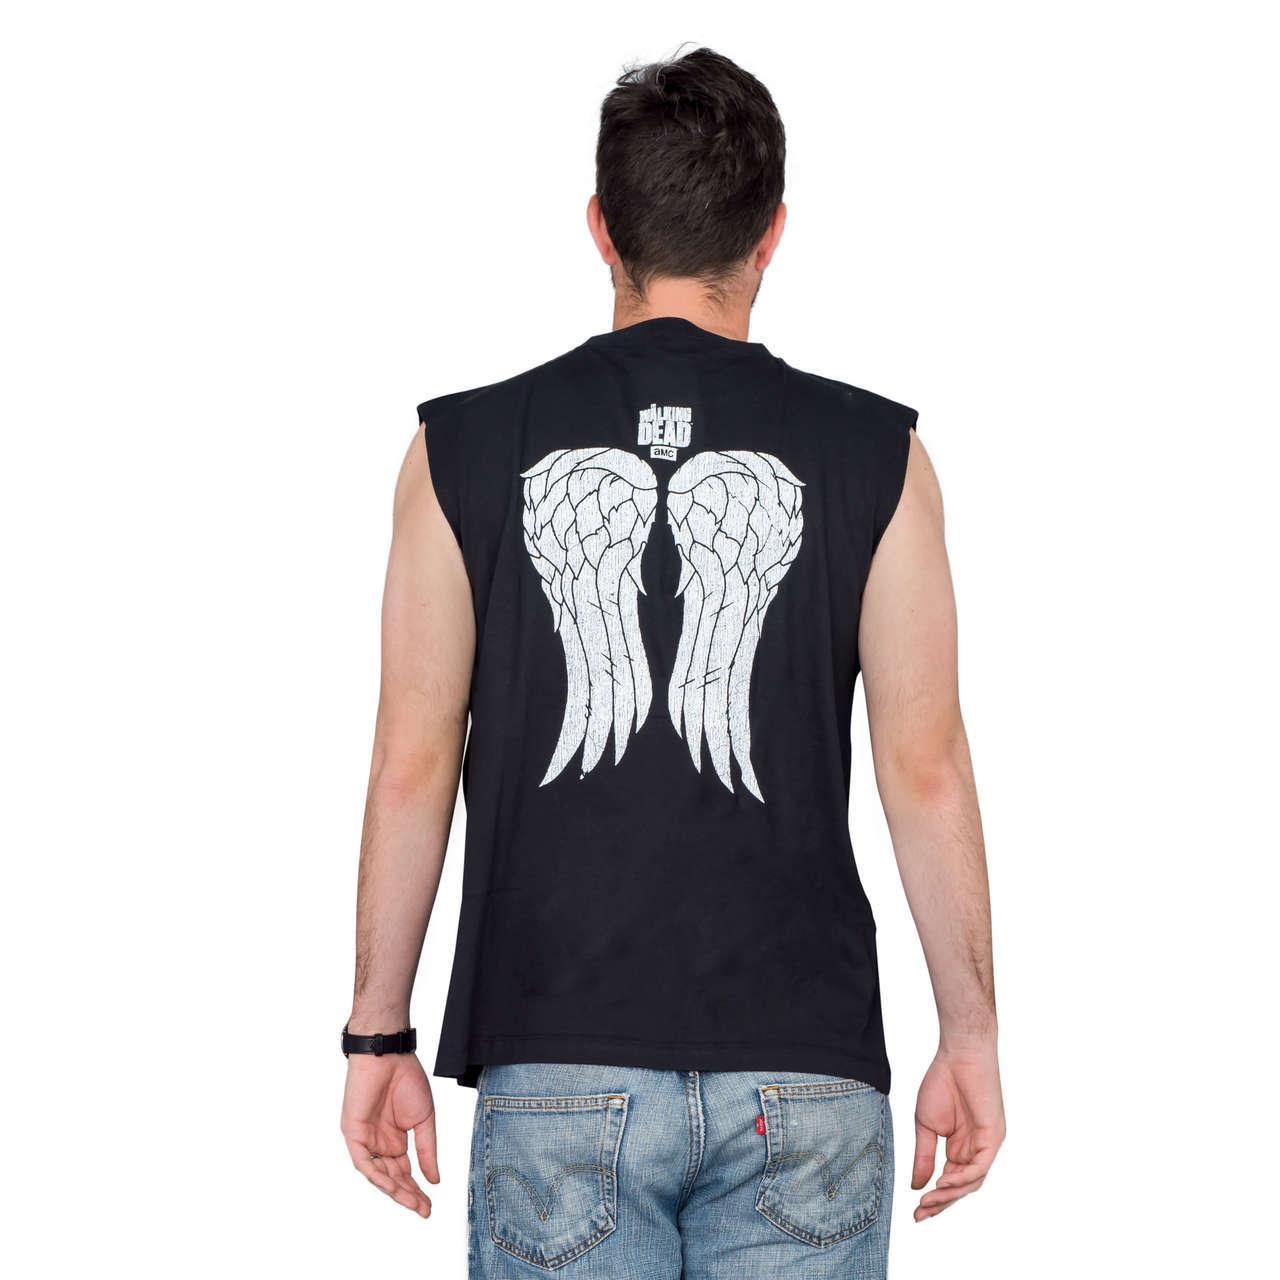 The Walking Dead Sorry Brother Tank Top T-Shirt-tvso